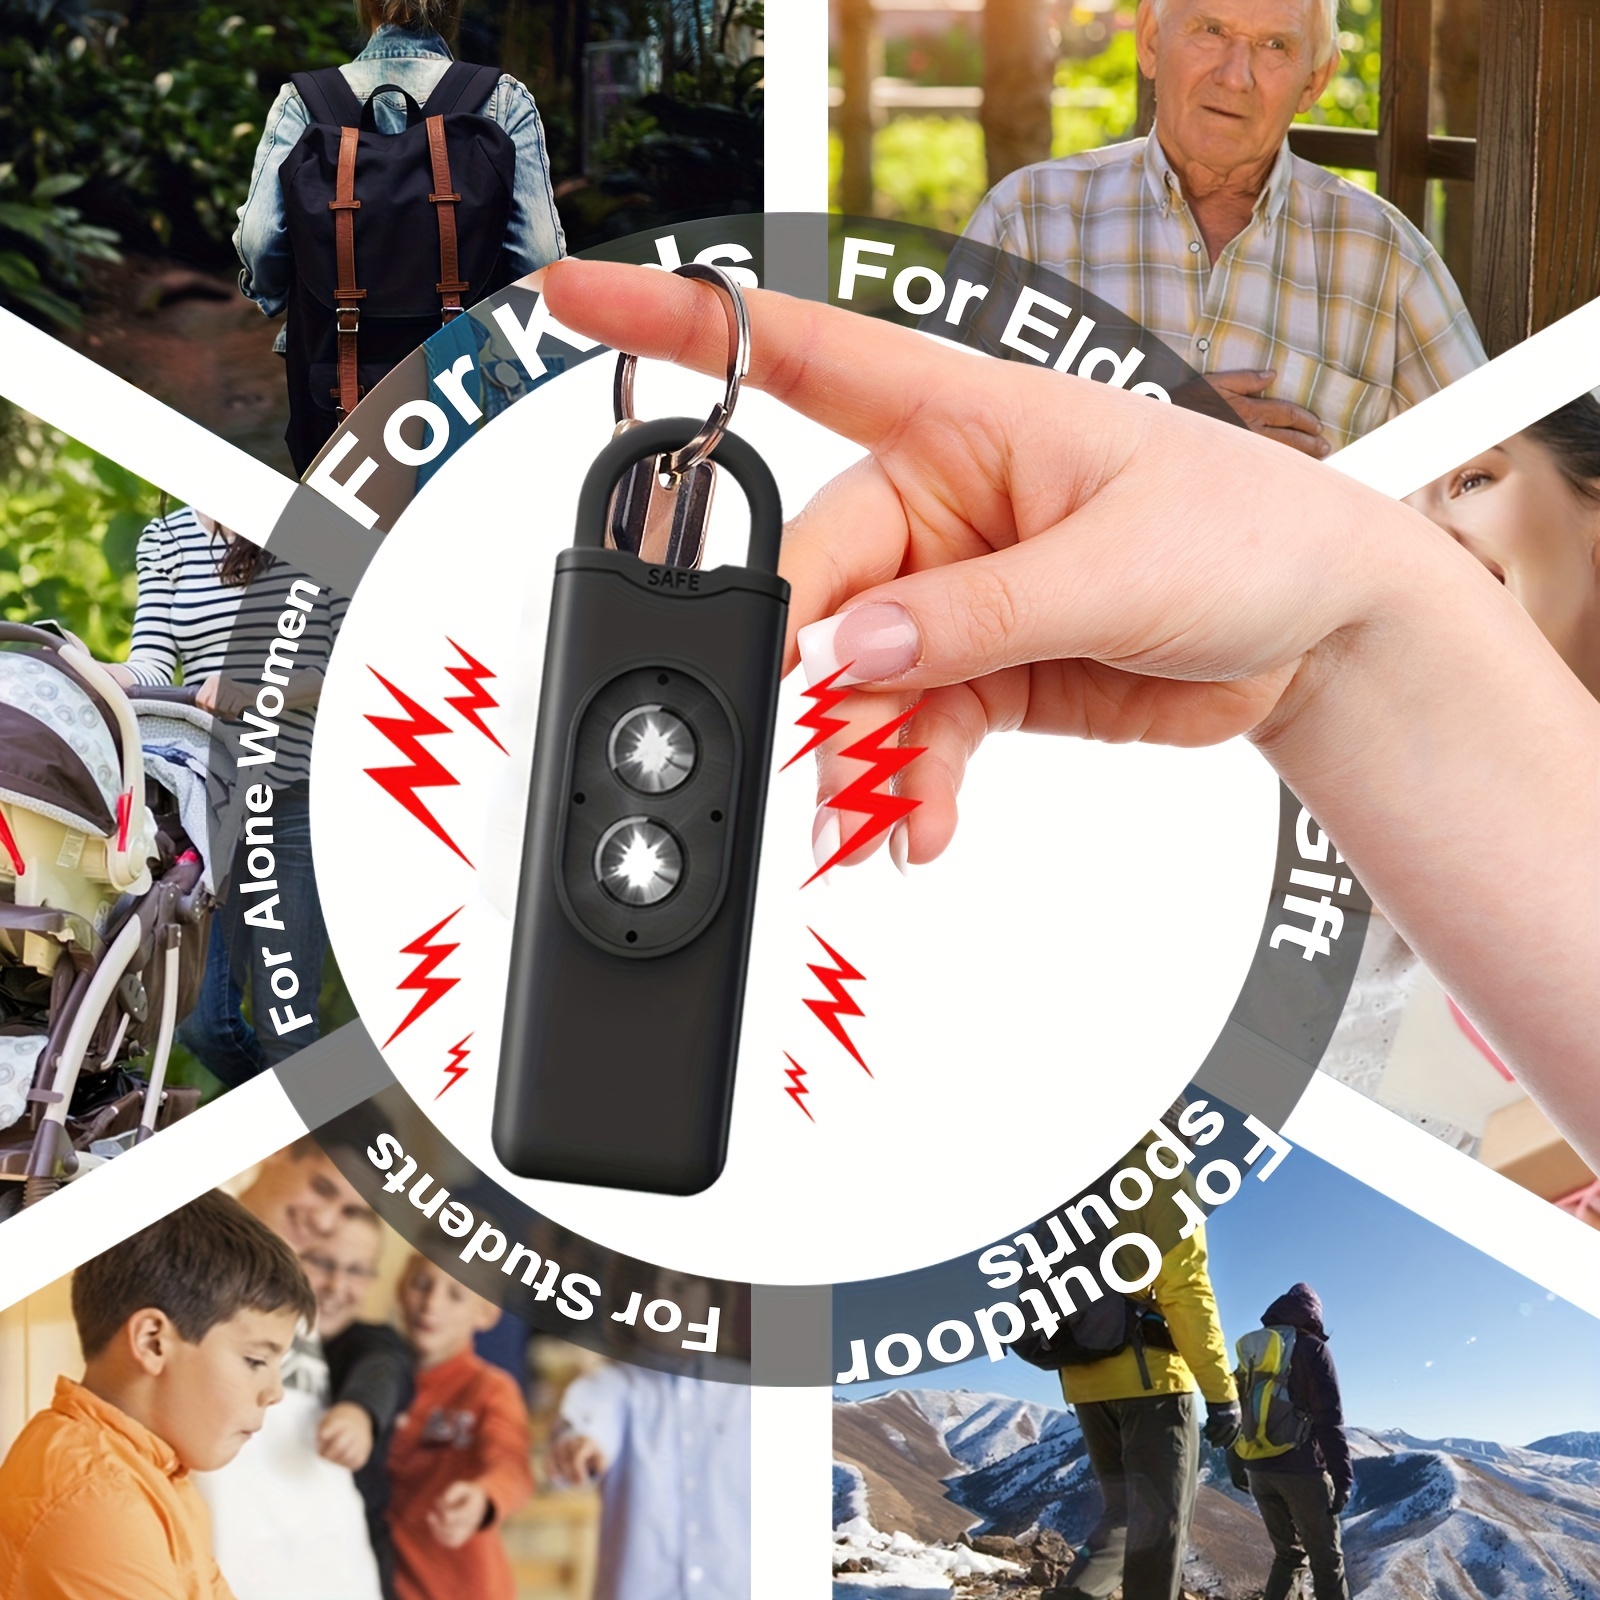 sos emergency alarms 130db keychain alarm personal with led strobe light protect alert safety security